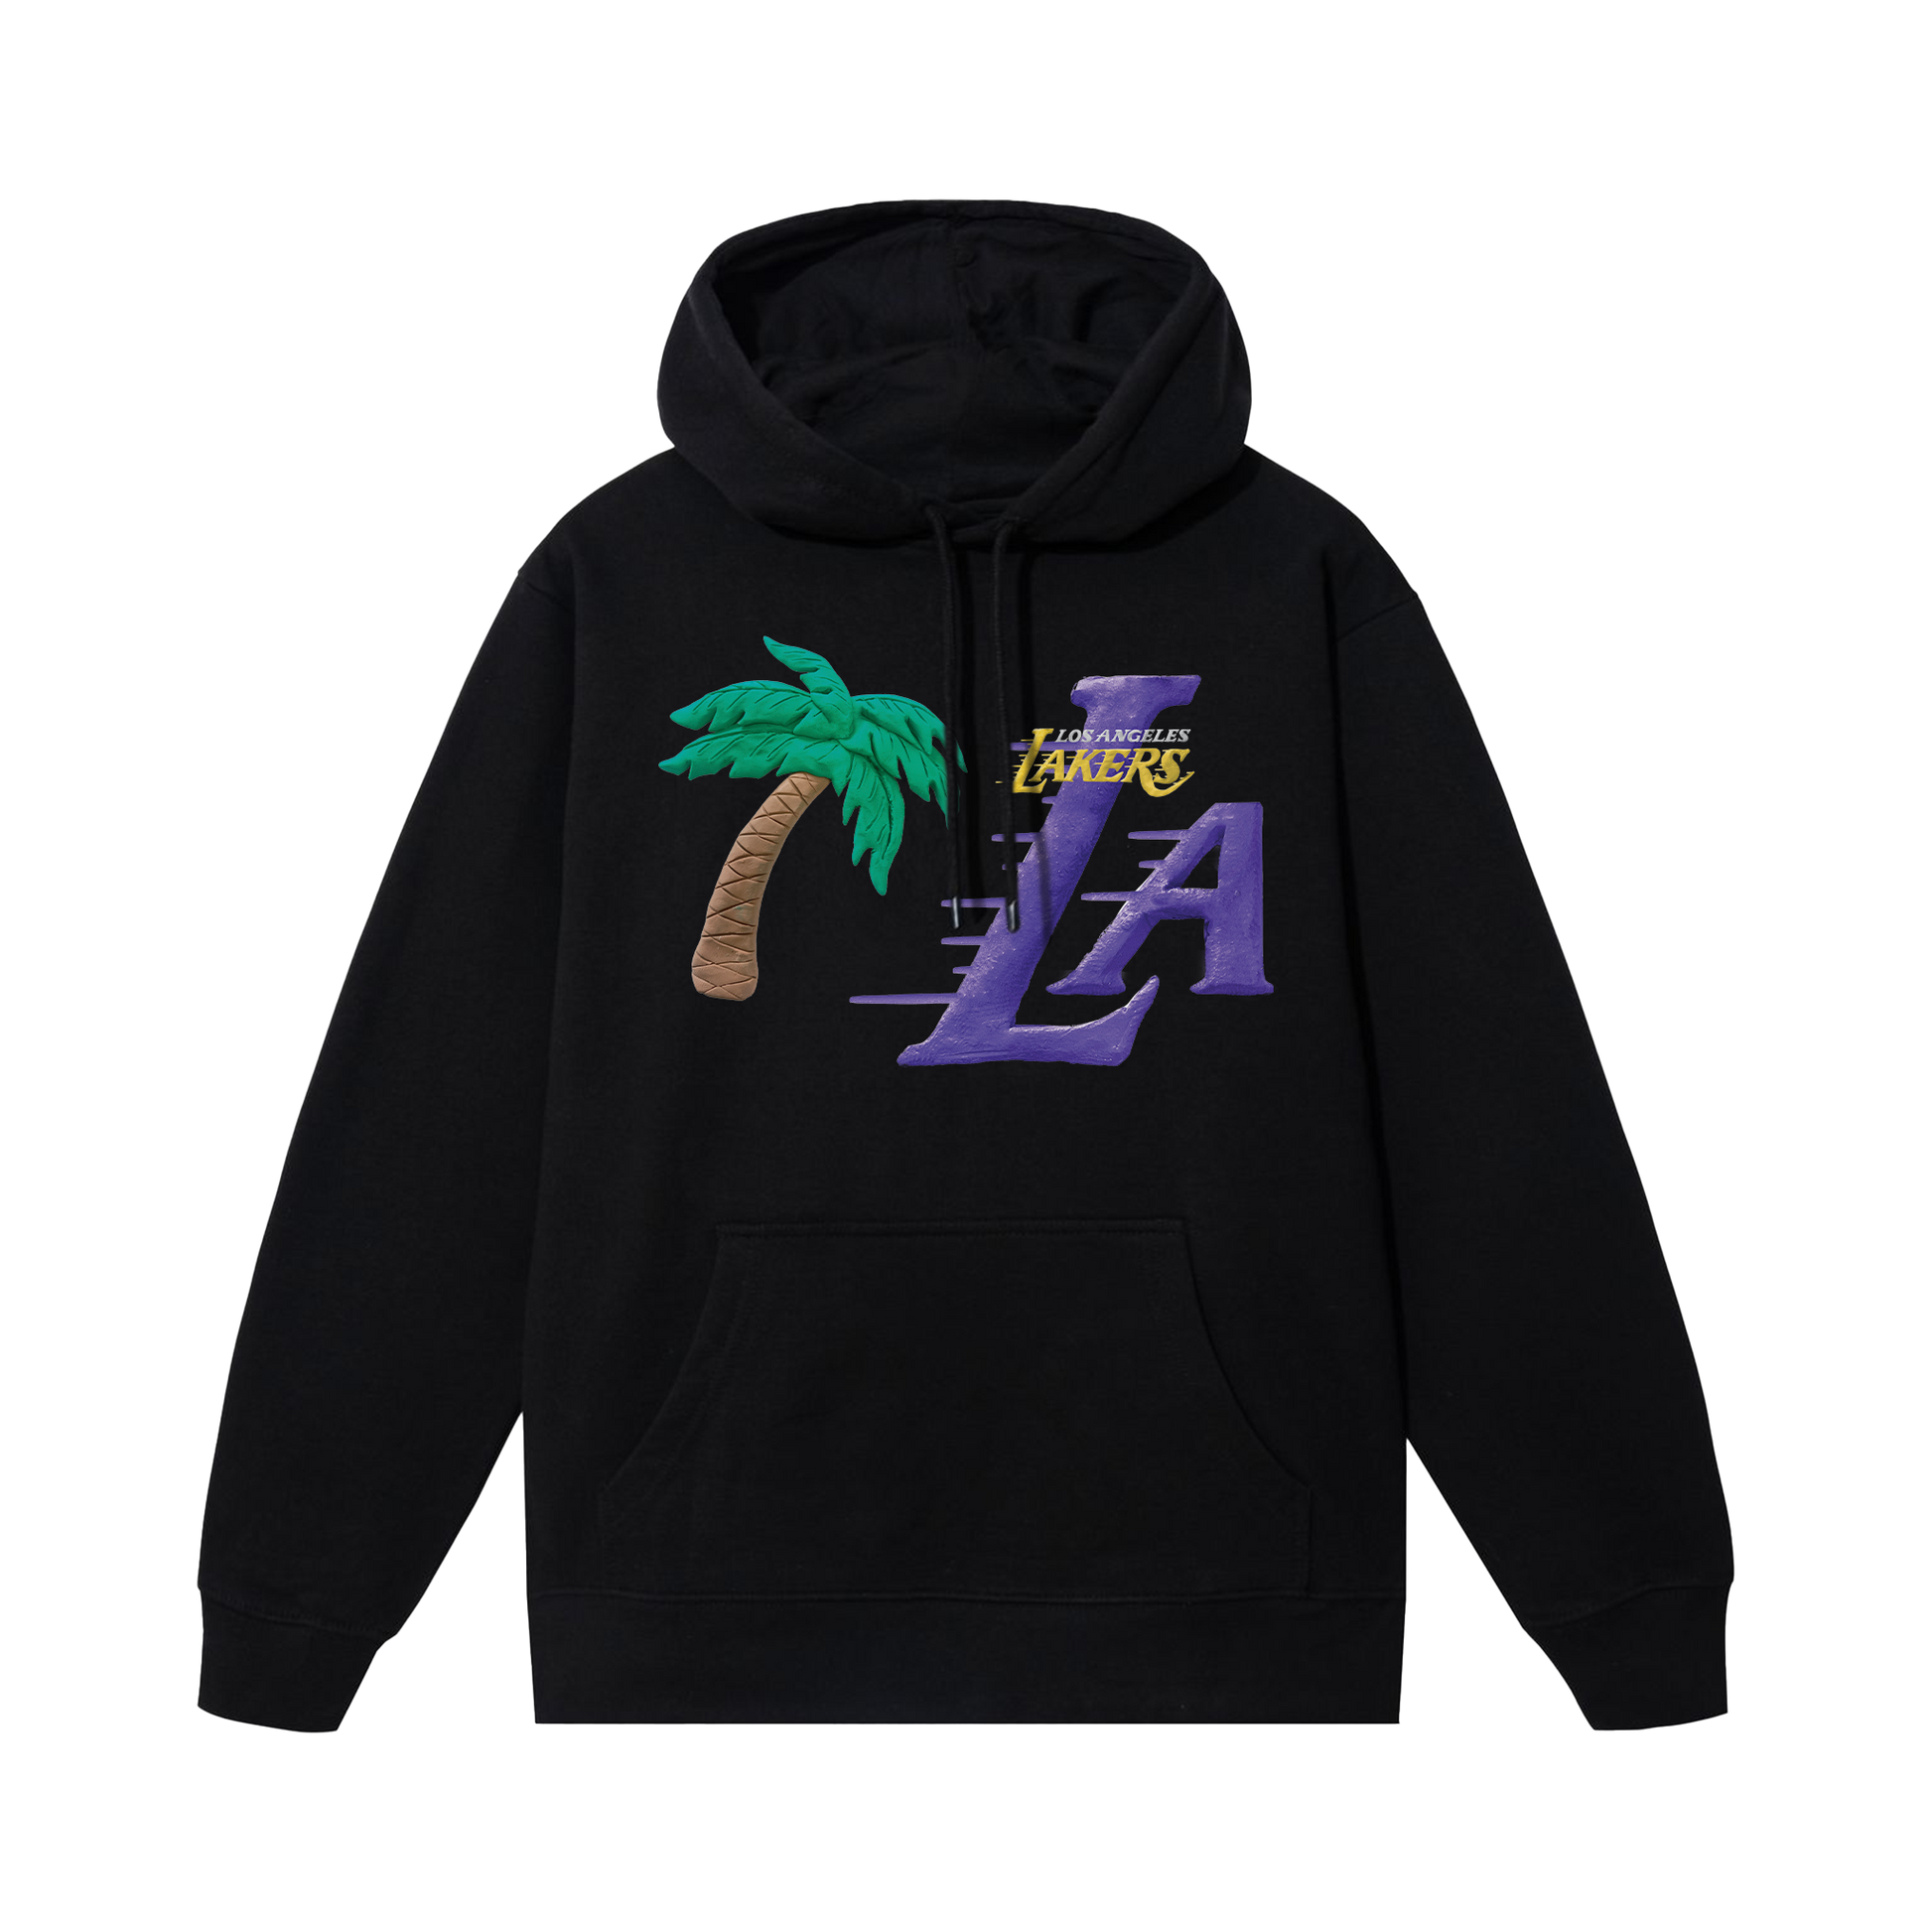 MARKET clothing brand MARKET LAKERS HOODIE. Find more graphic tees, hats and more at MarketStudios.com. Formally Chinatown Market.